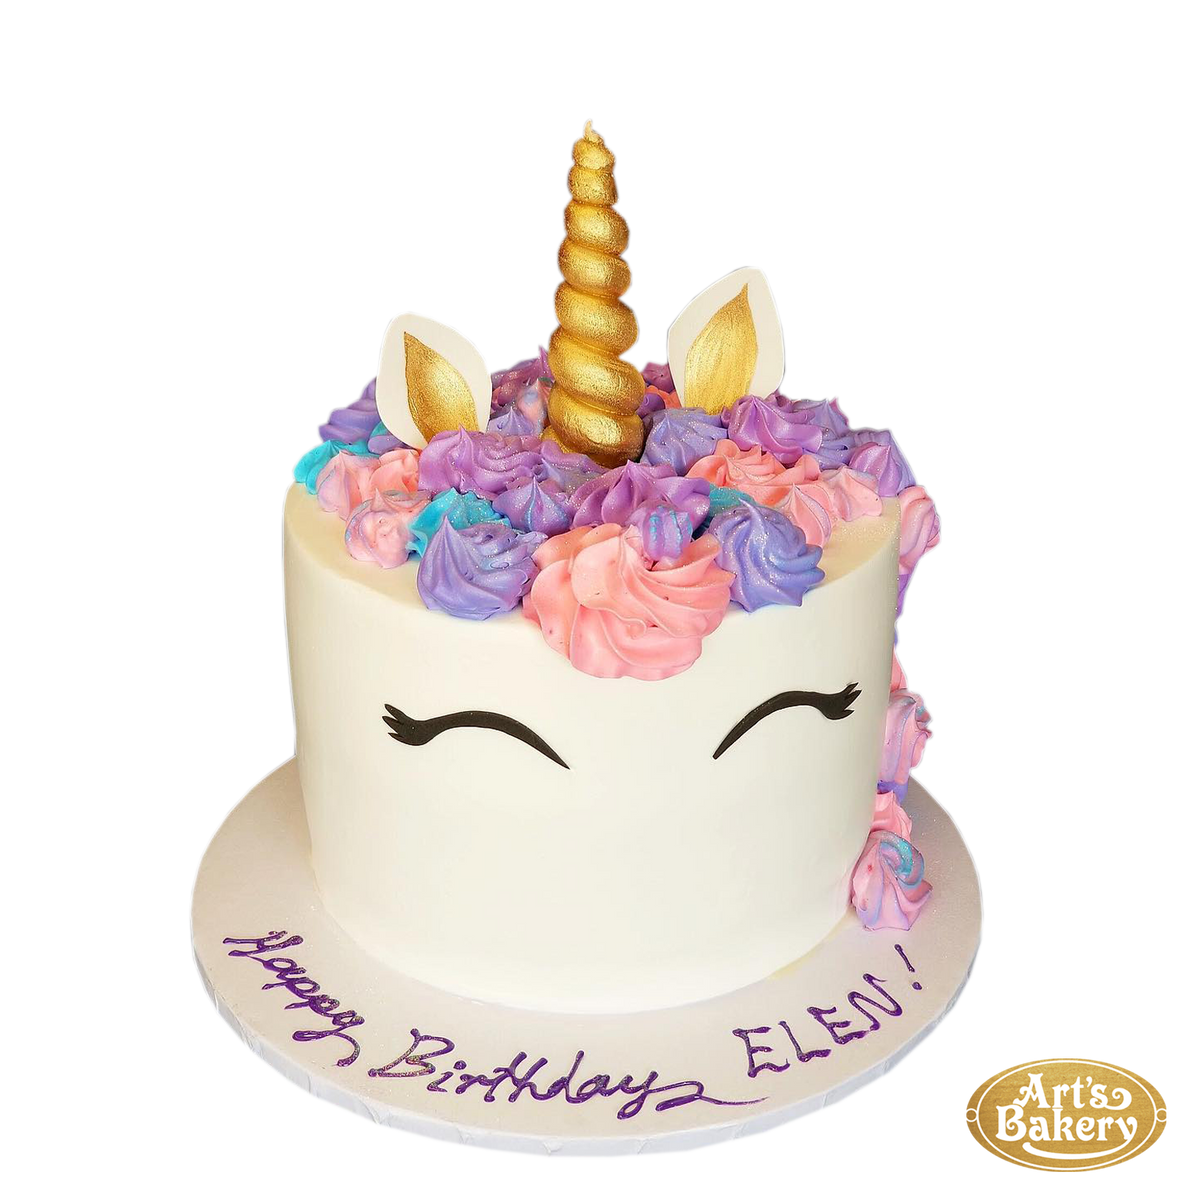 Unicorn with Multi-Color Frosting as Hair Cake 12 - Art's Bakery Glendale